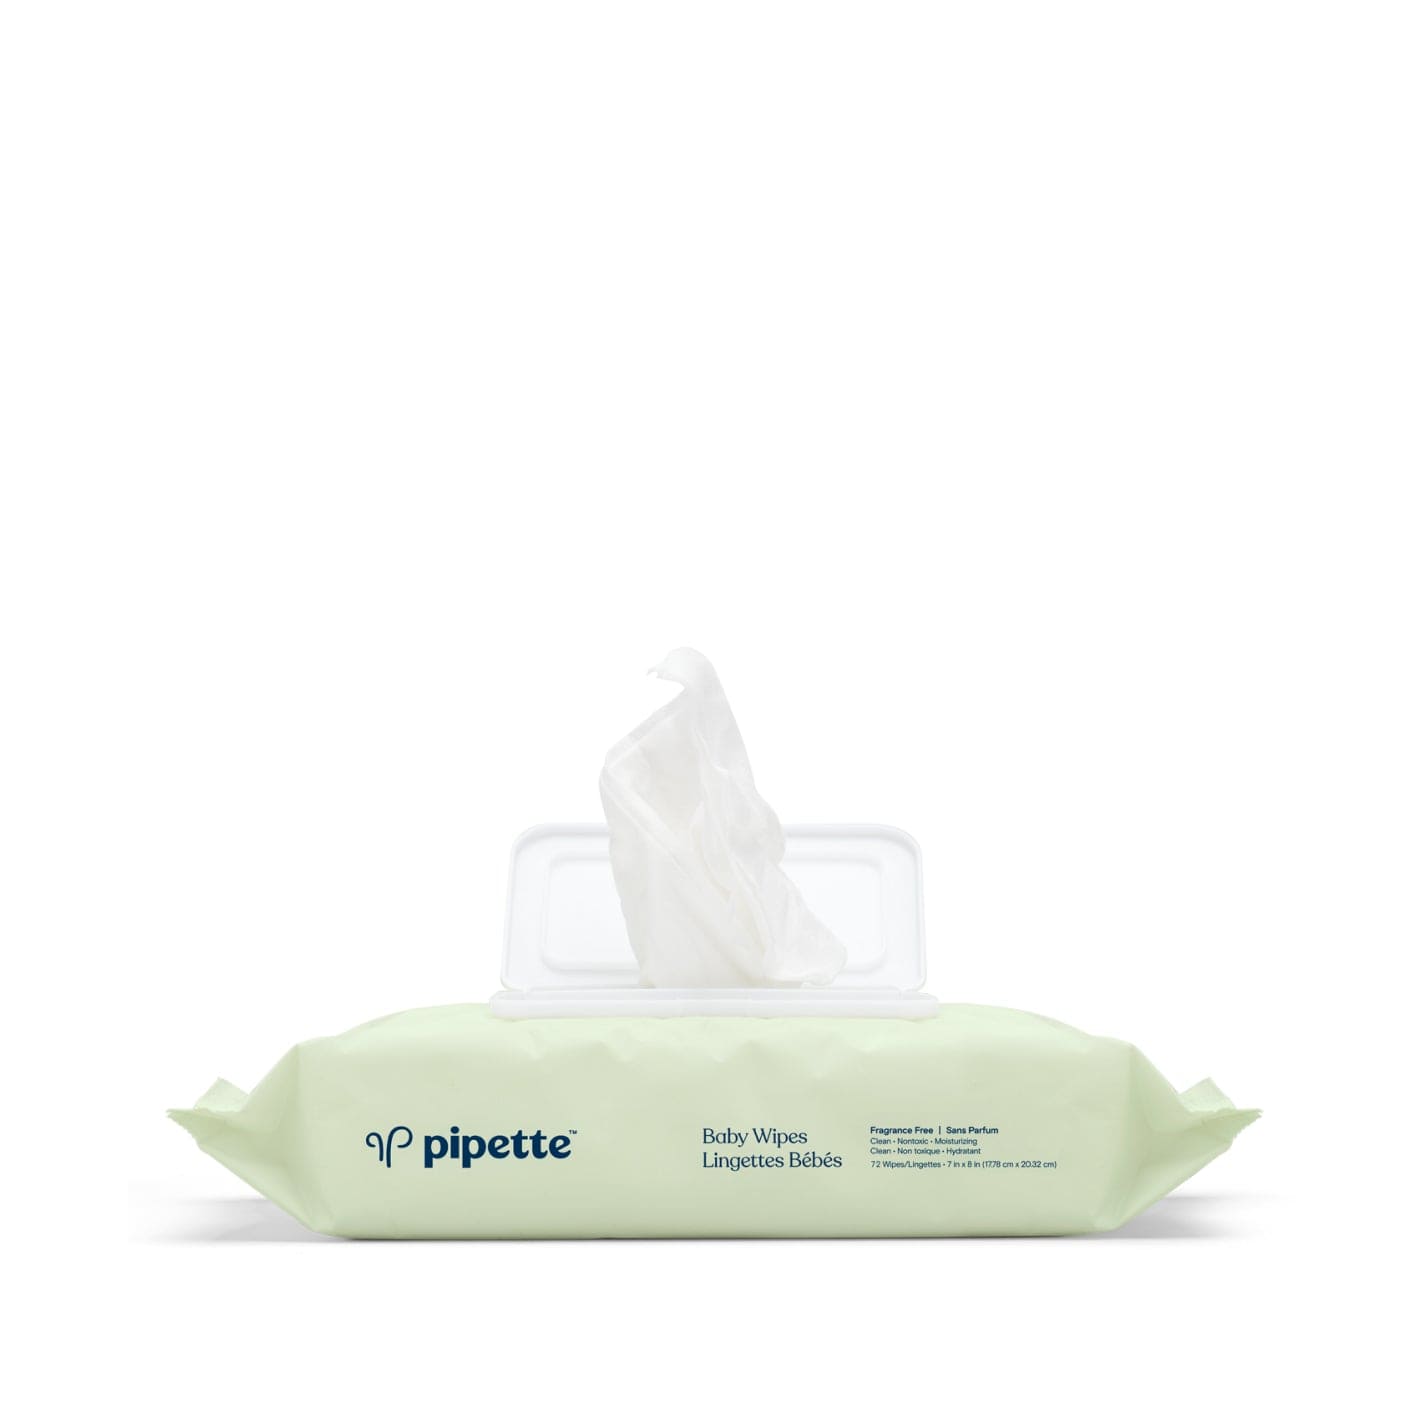 HOW TO USE APPLE GUARDE AND WATER WIPES